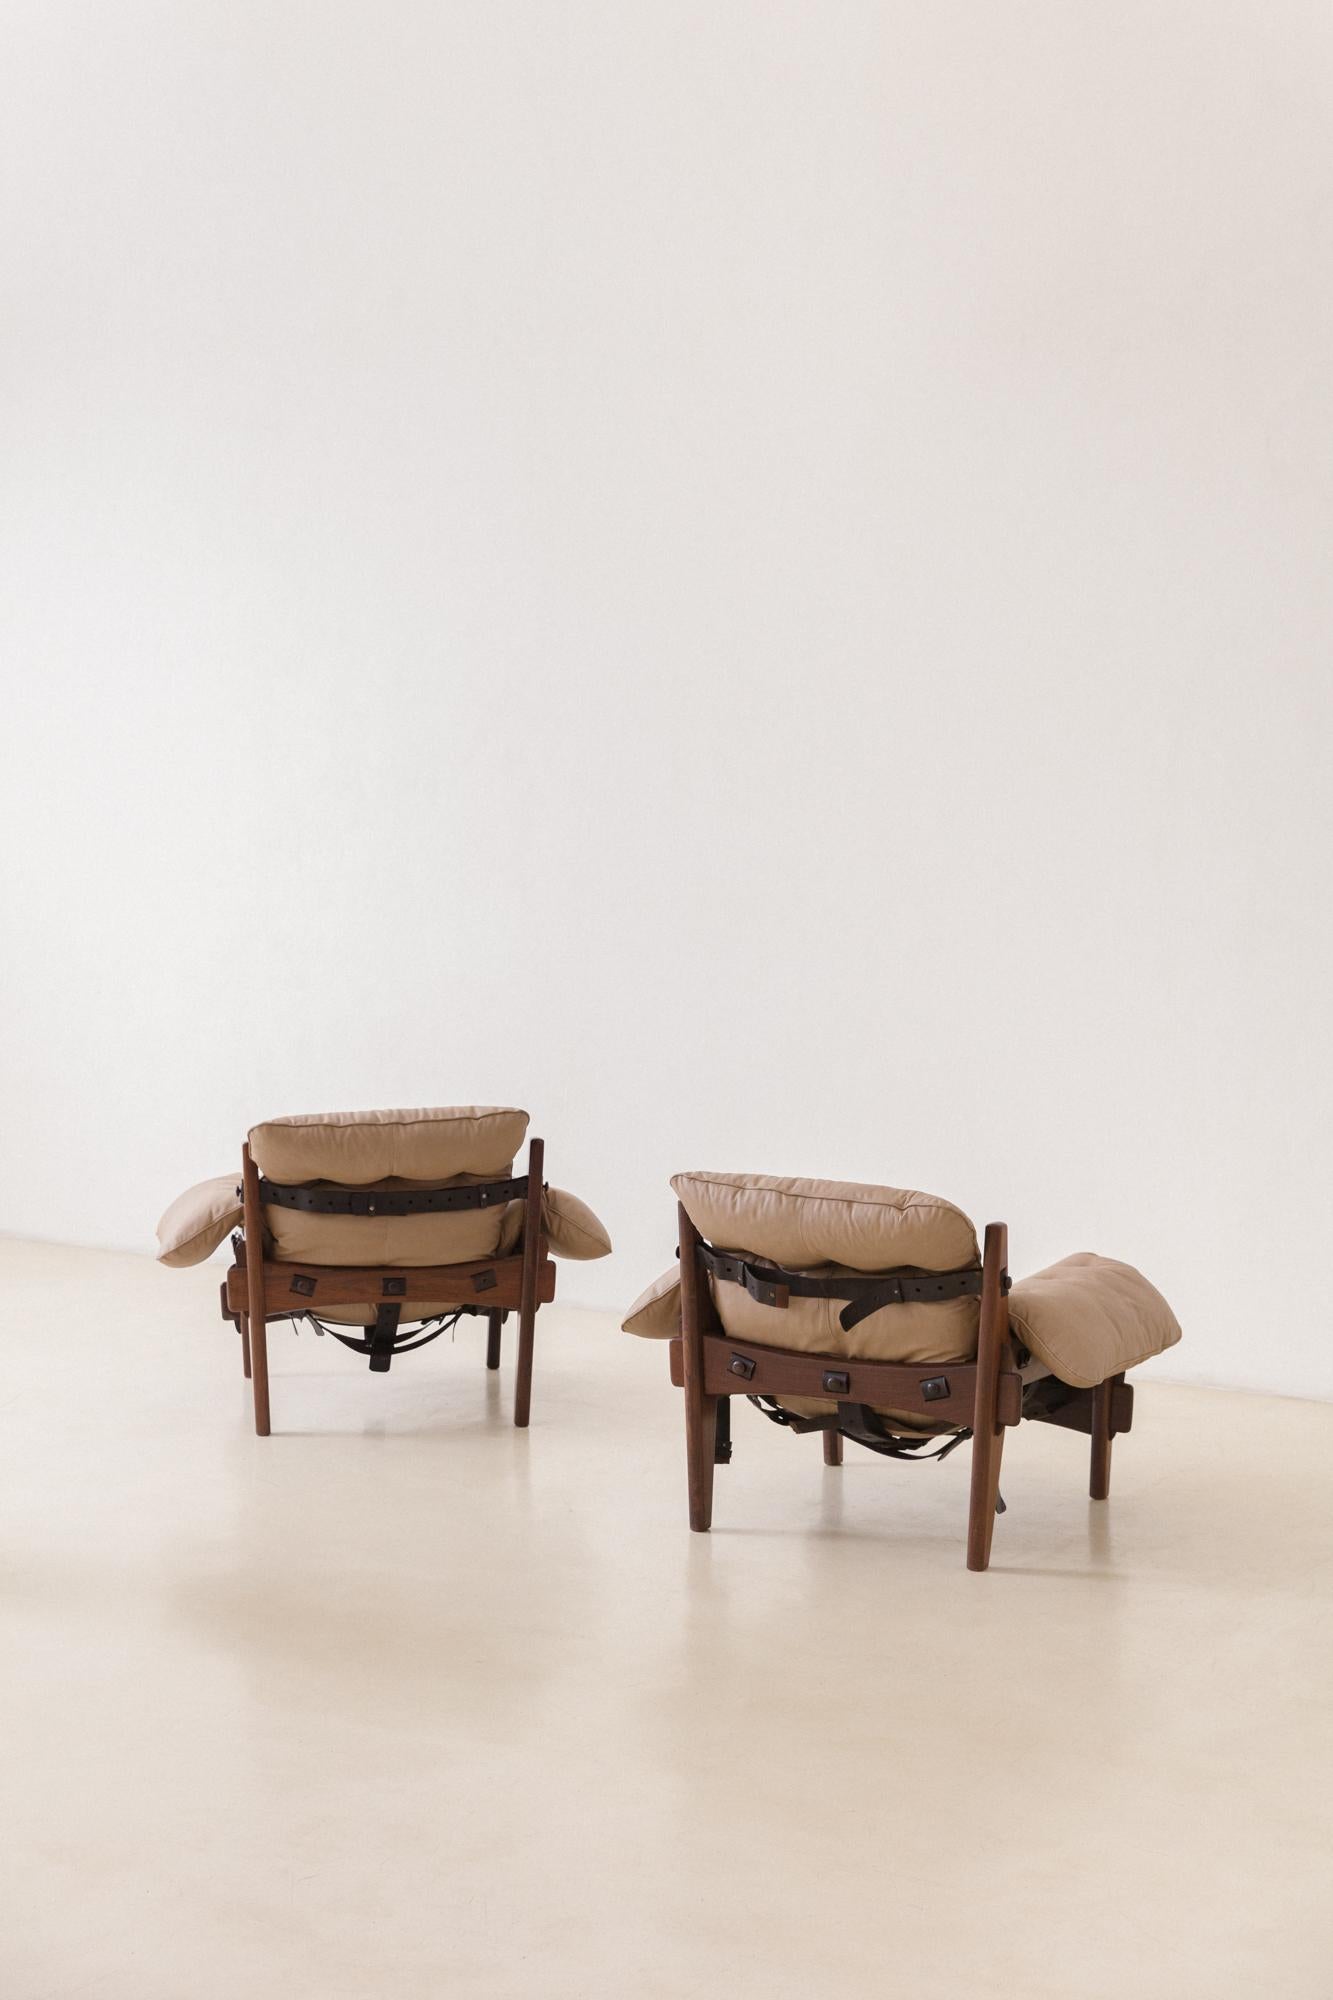 Throughout Sergio Rodrigues' career, many of his pieces underwent adjustment, adapted to new material resources and production conditions, or even reinvented.

The Moleca armchair is one of those cases. This piece, created in 1963, was an